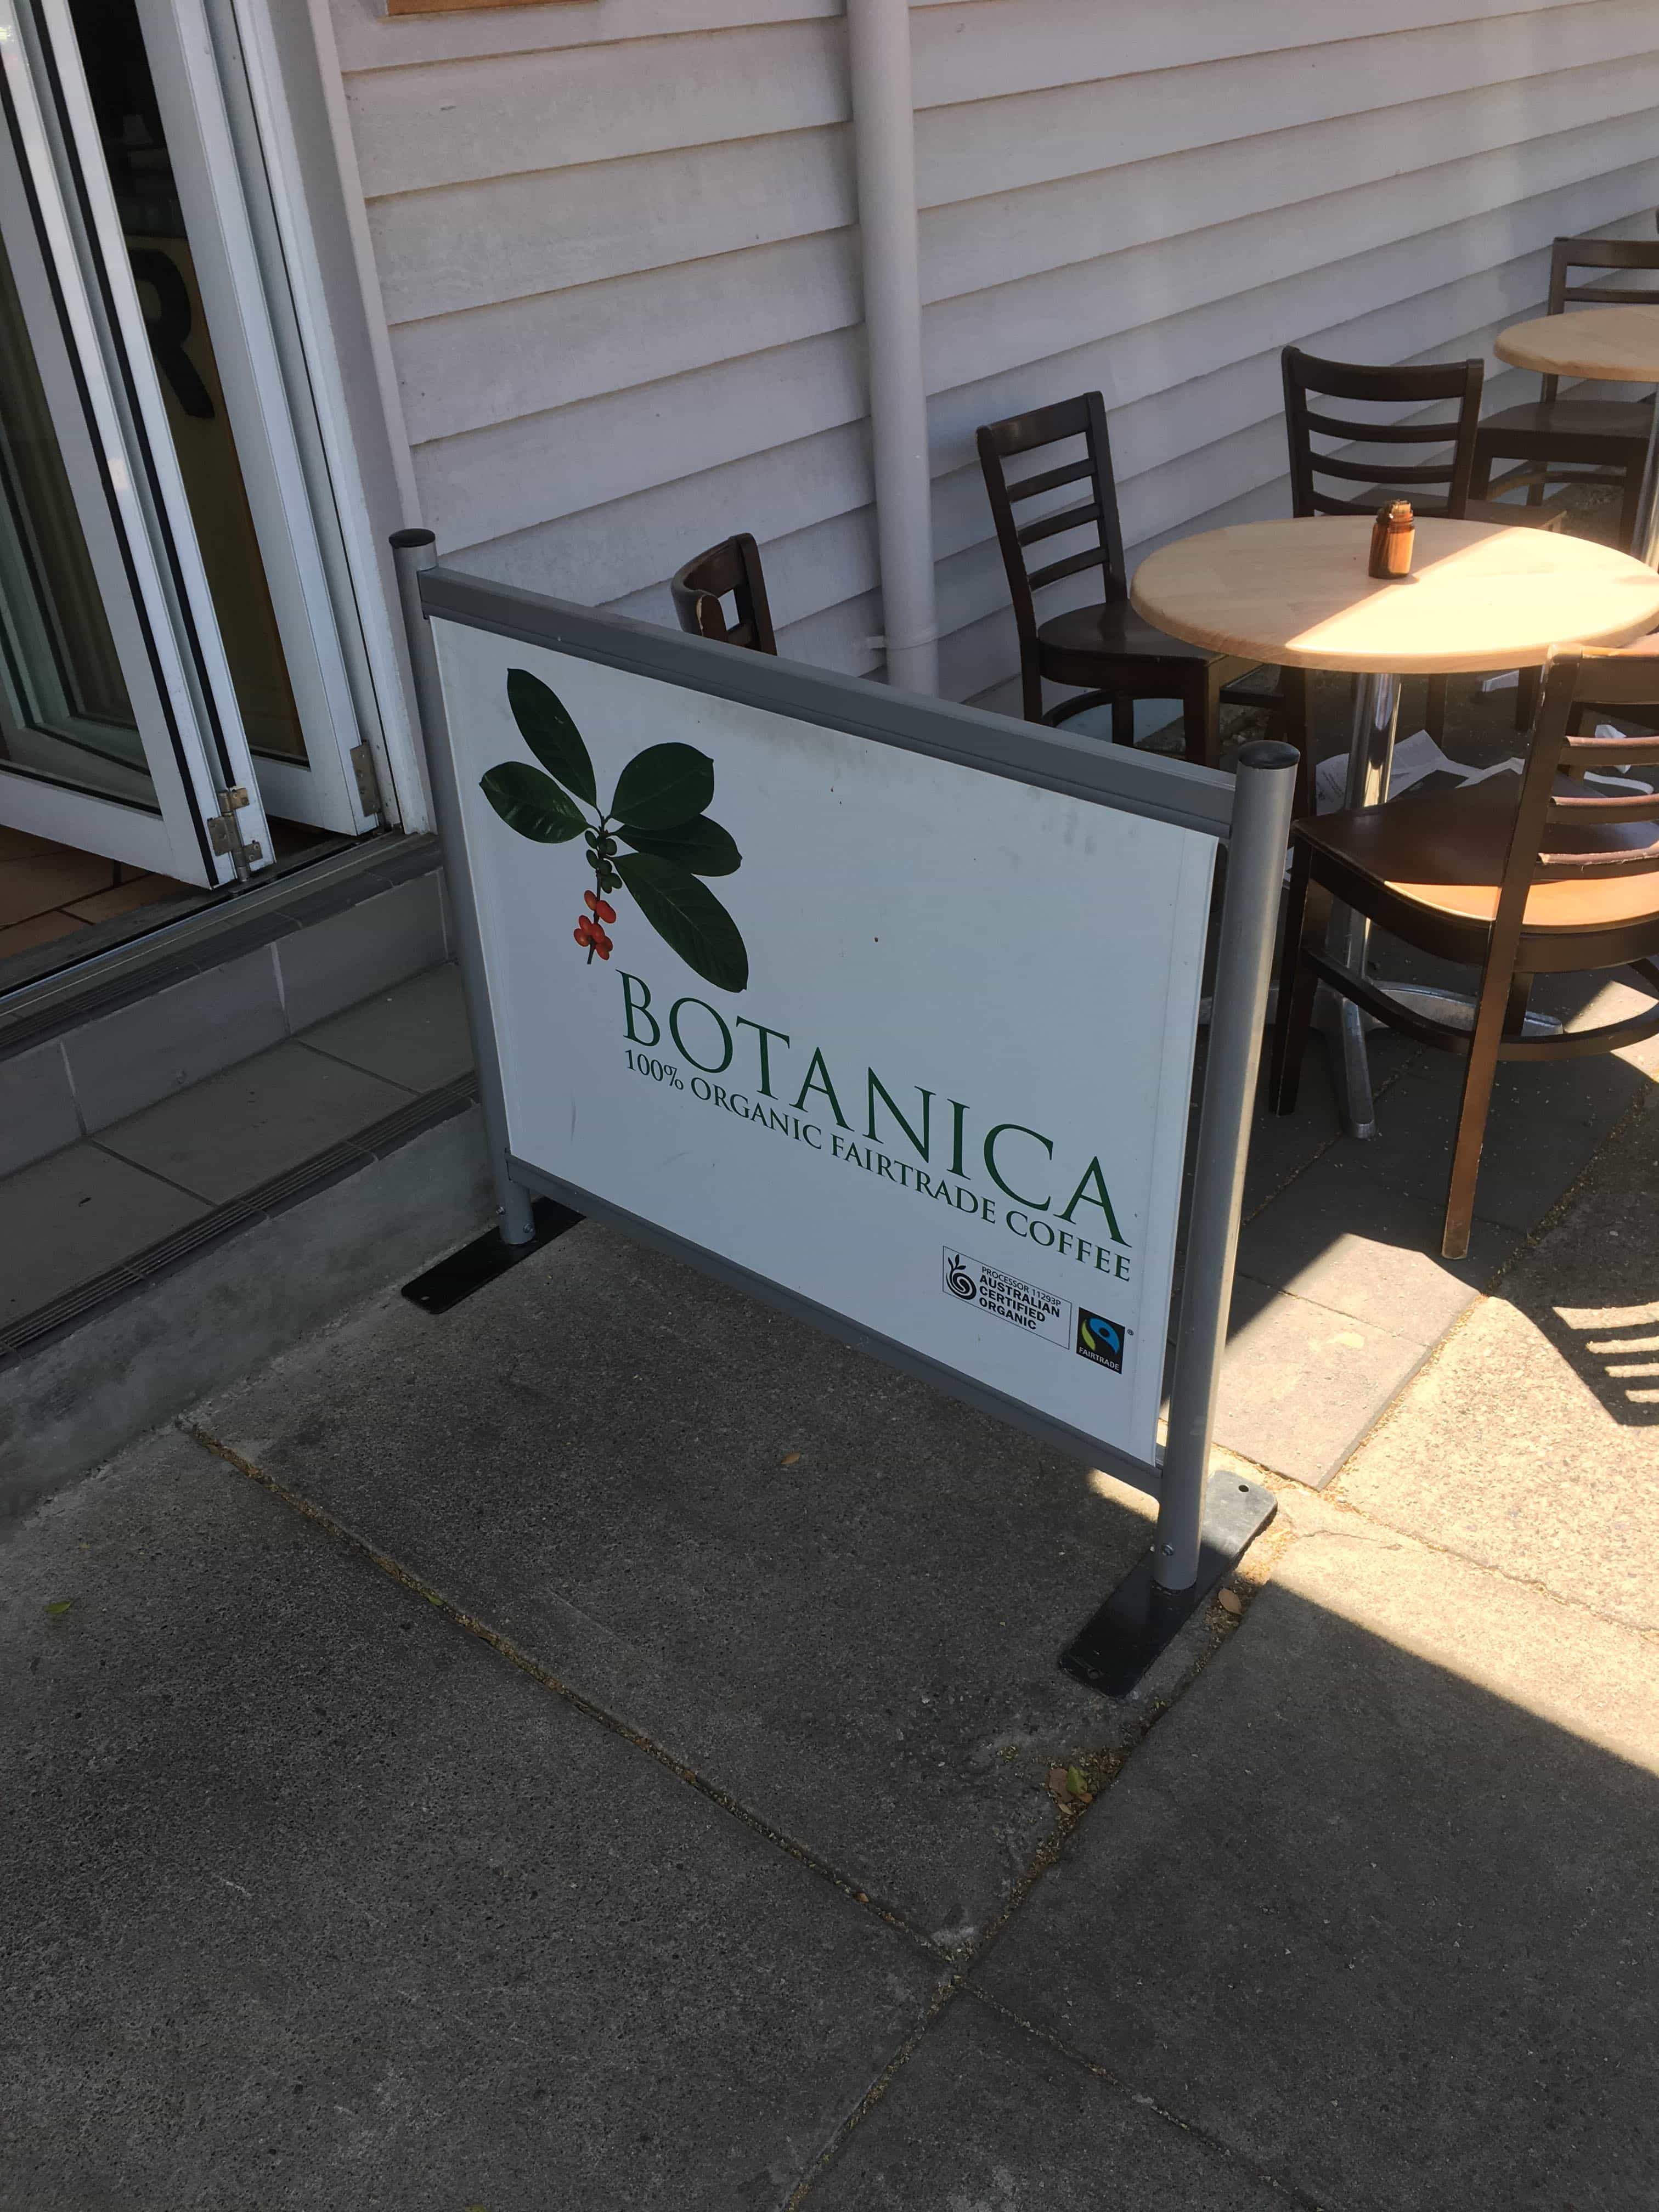 Botanica is one of many great cafe's just 500m from Black Fold. Photo taken by Property Mash 27/10/2016.